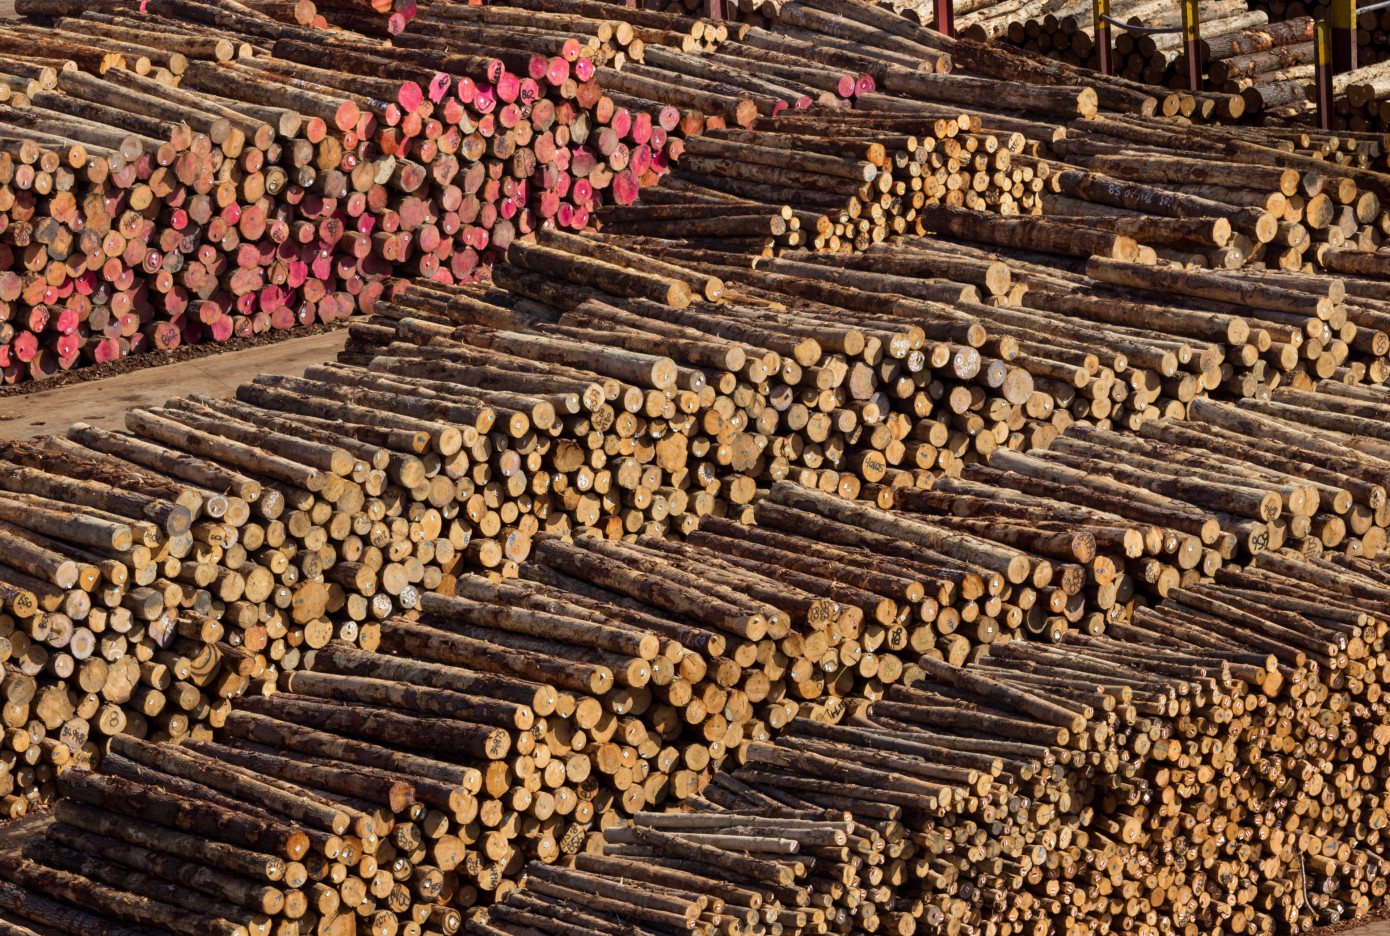 Exports of logs from Brazil fall 71% in March